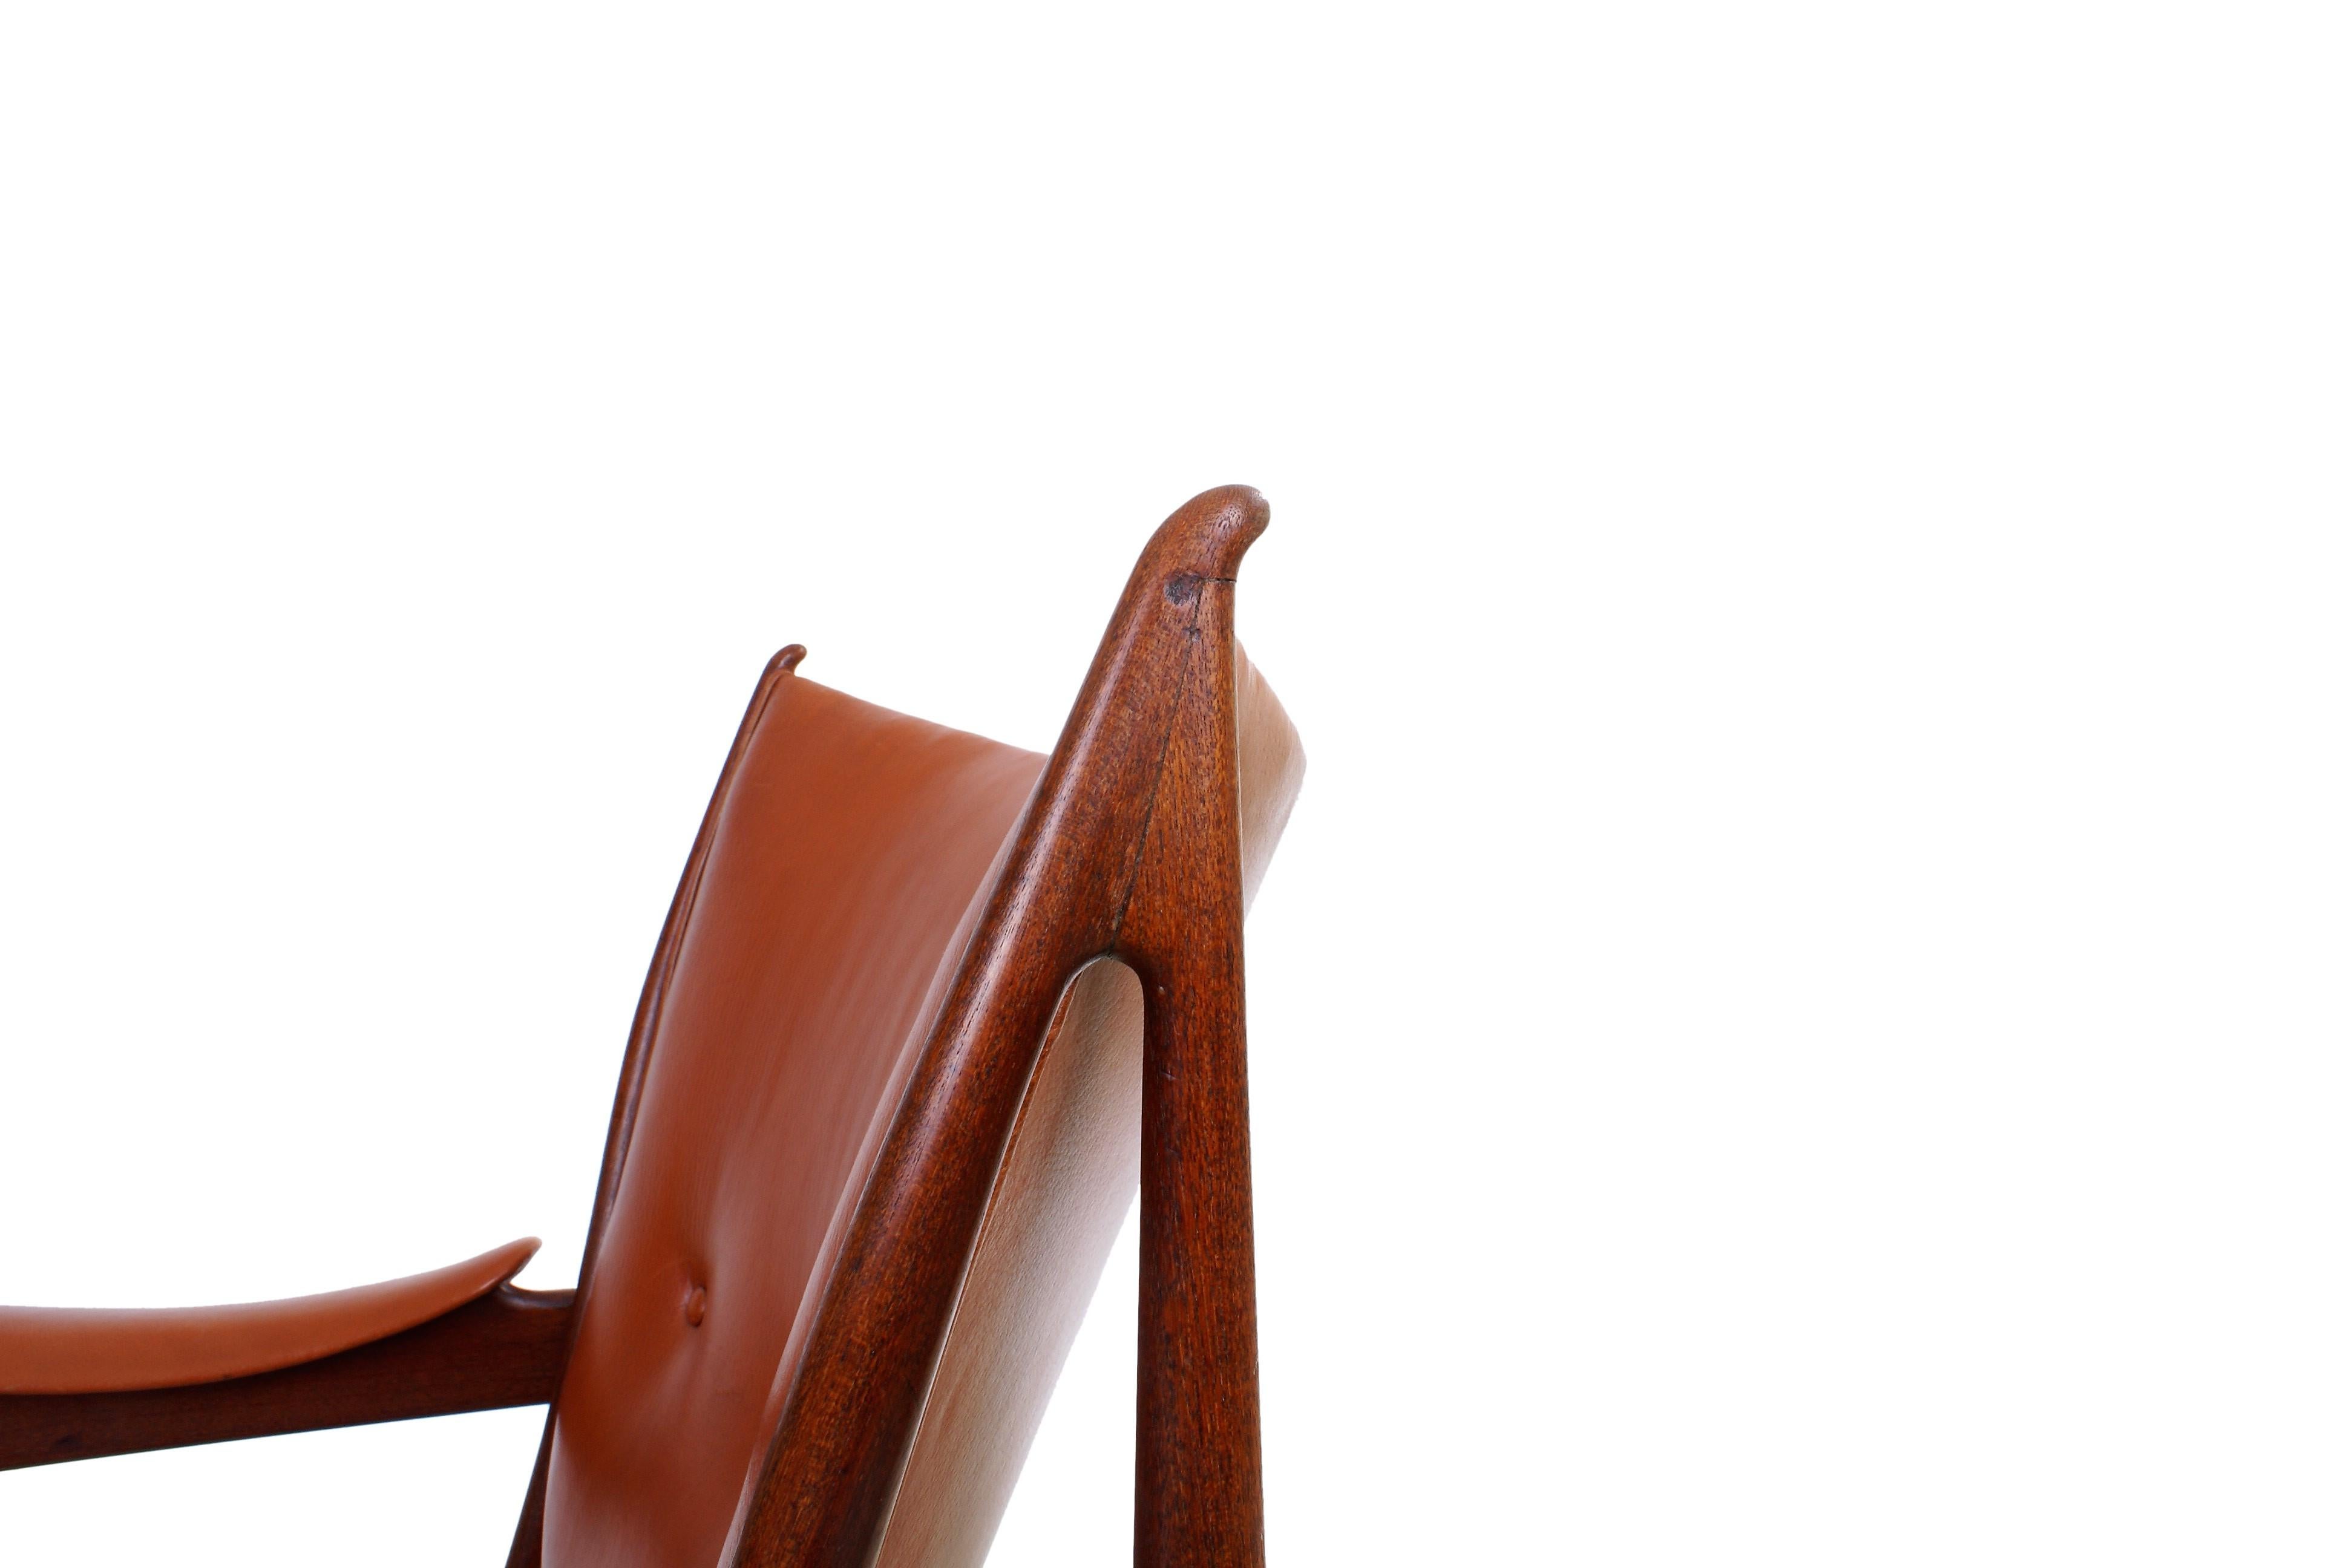 Finn Juhl Rare 'Chieftain' Chair in Teak and Leather for Niels Vodder, 1949 For Sale 2